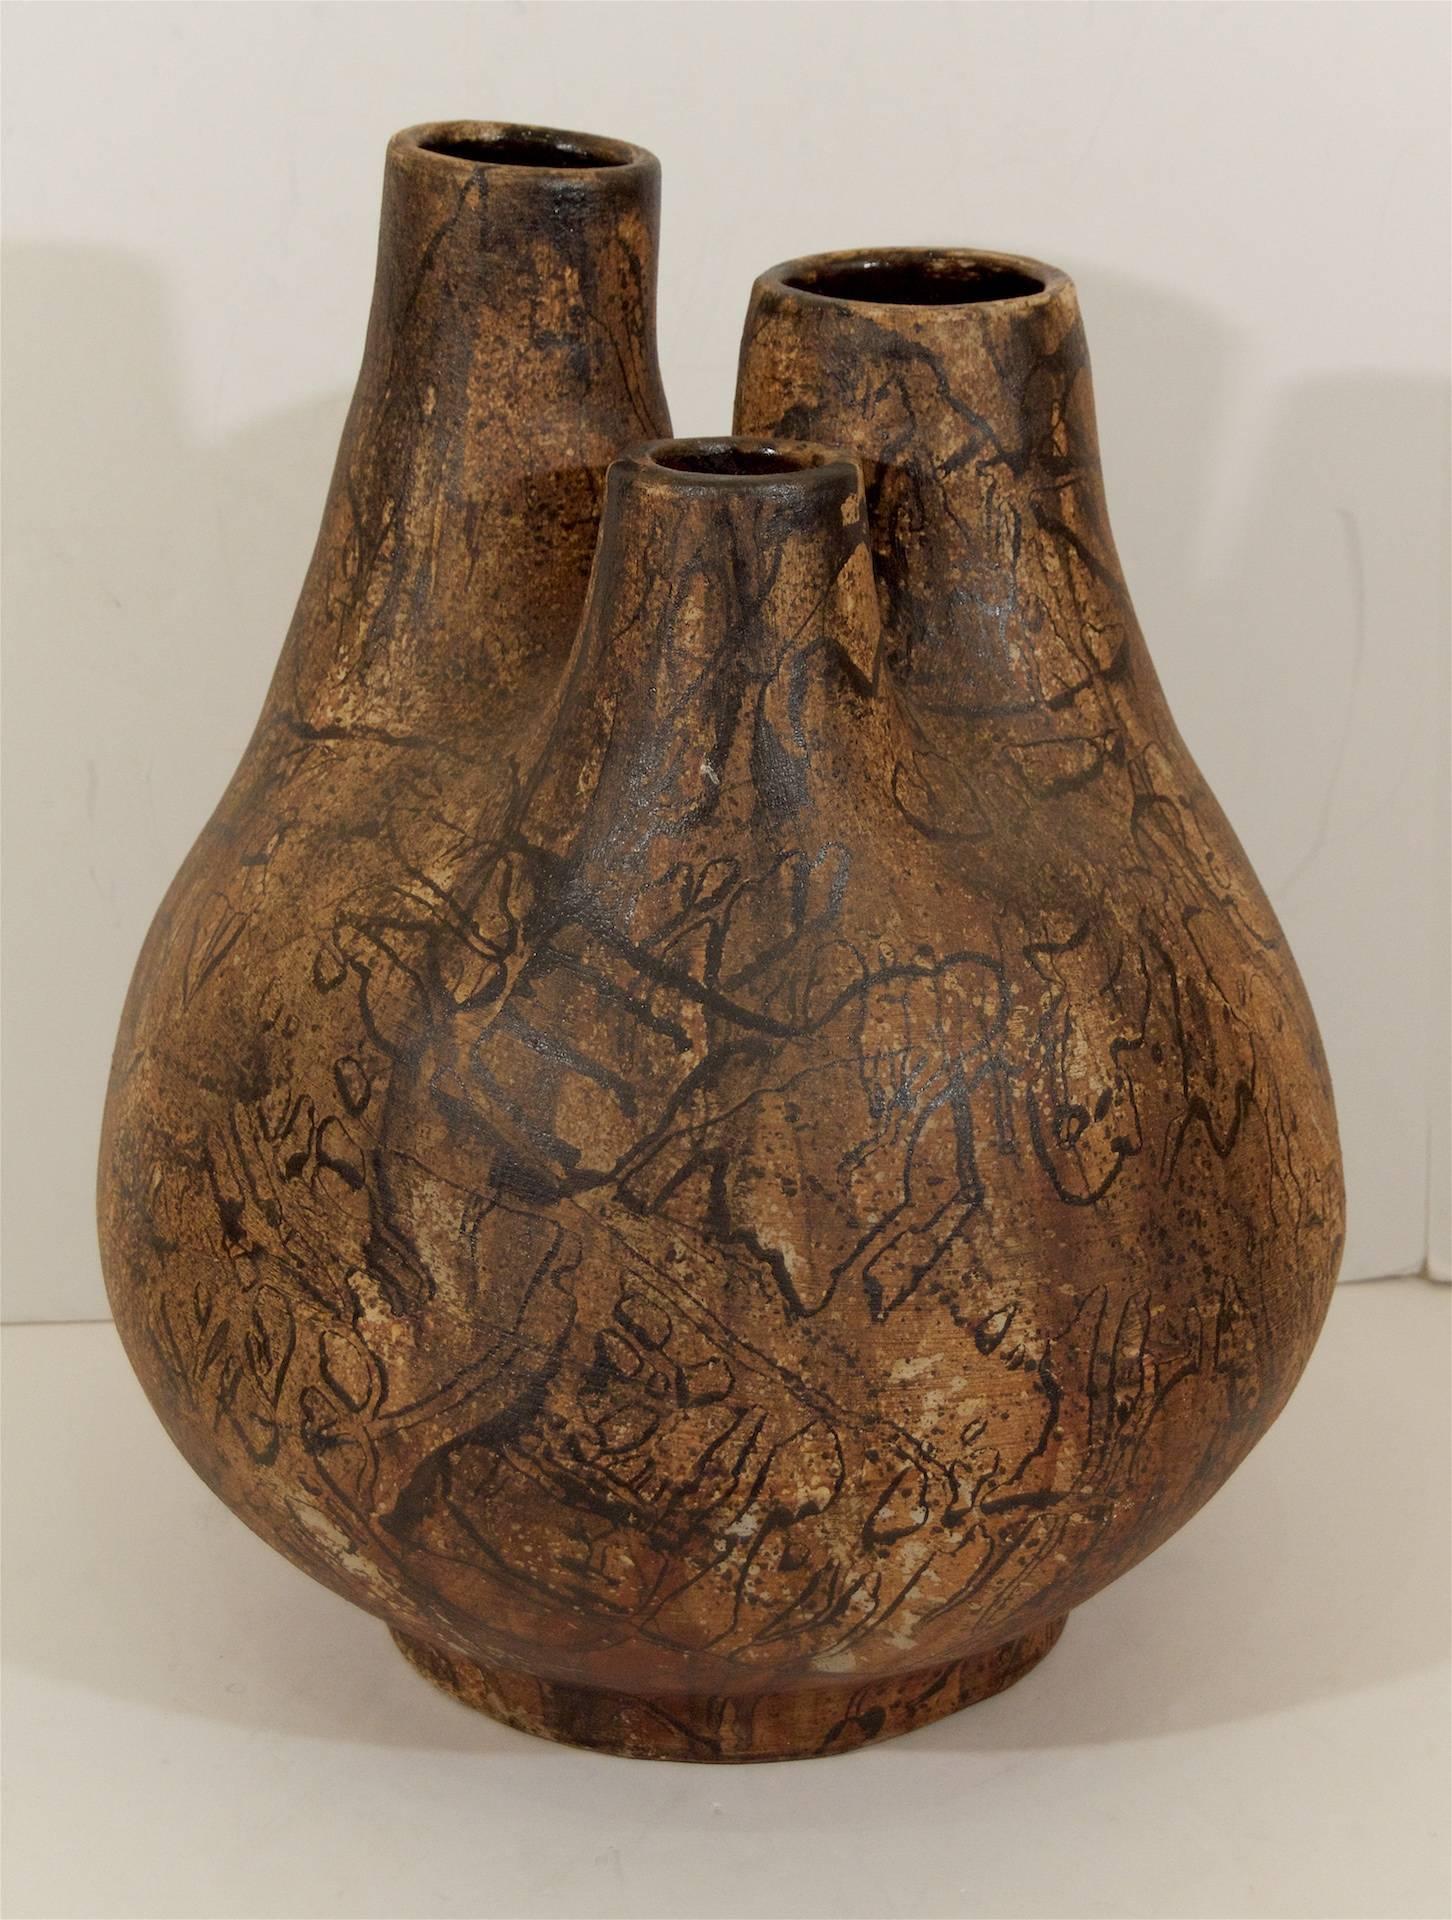 An unusual designed vase with brown glaze and a black organic design.